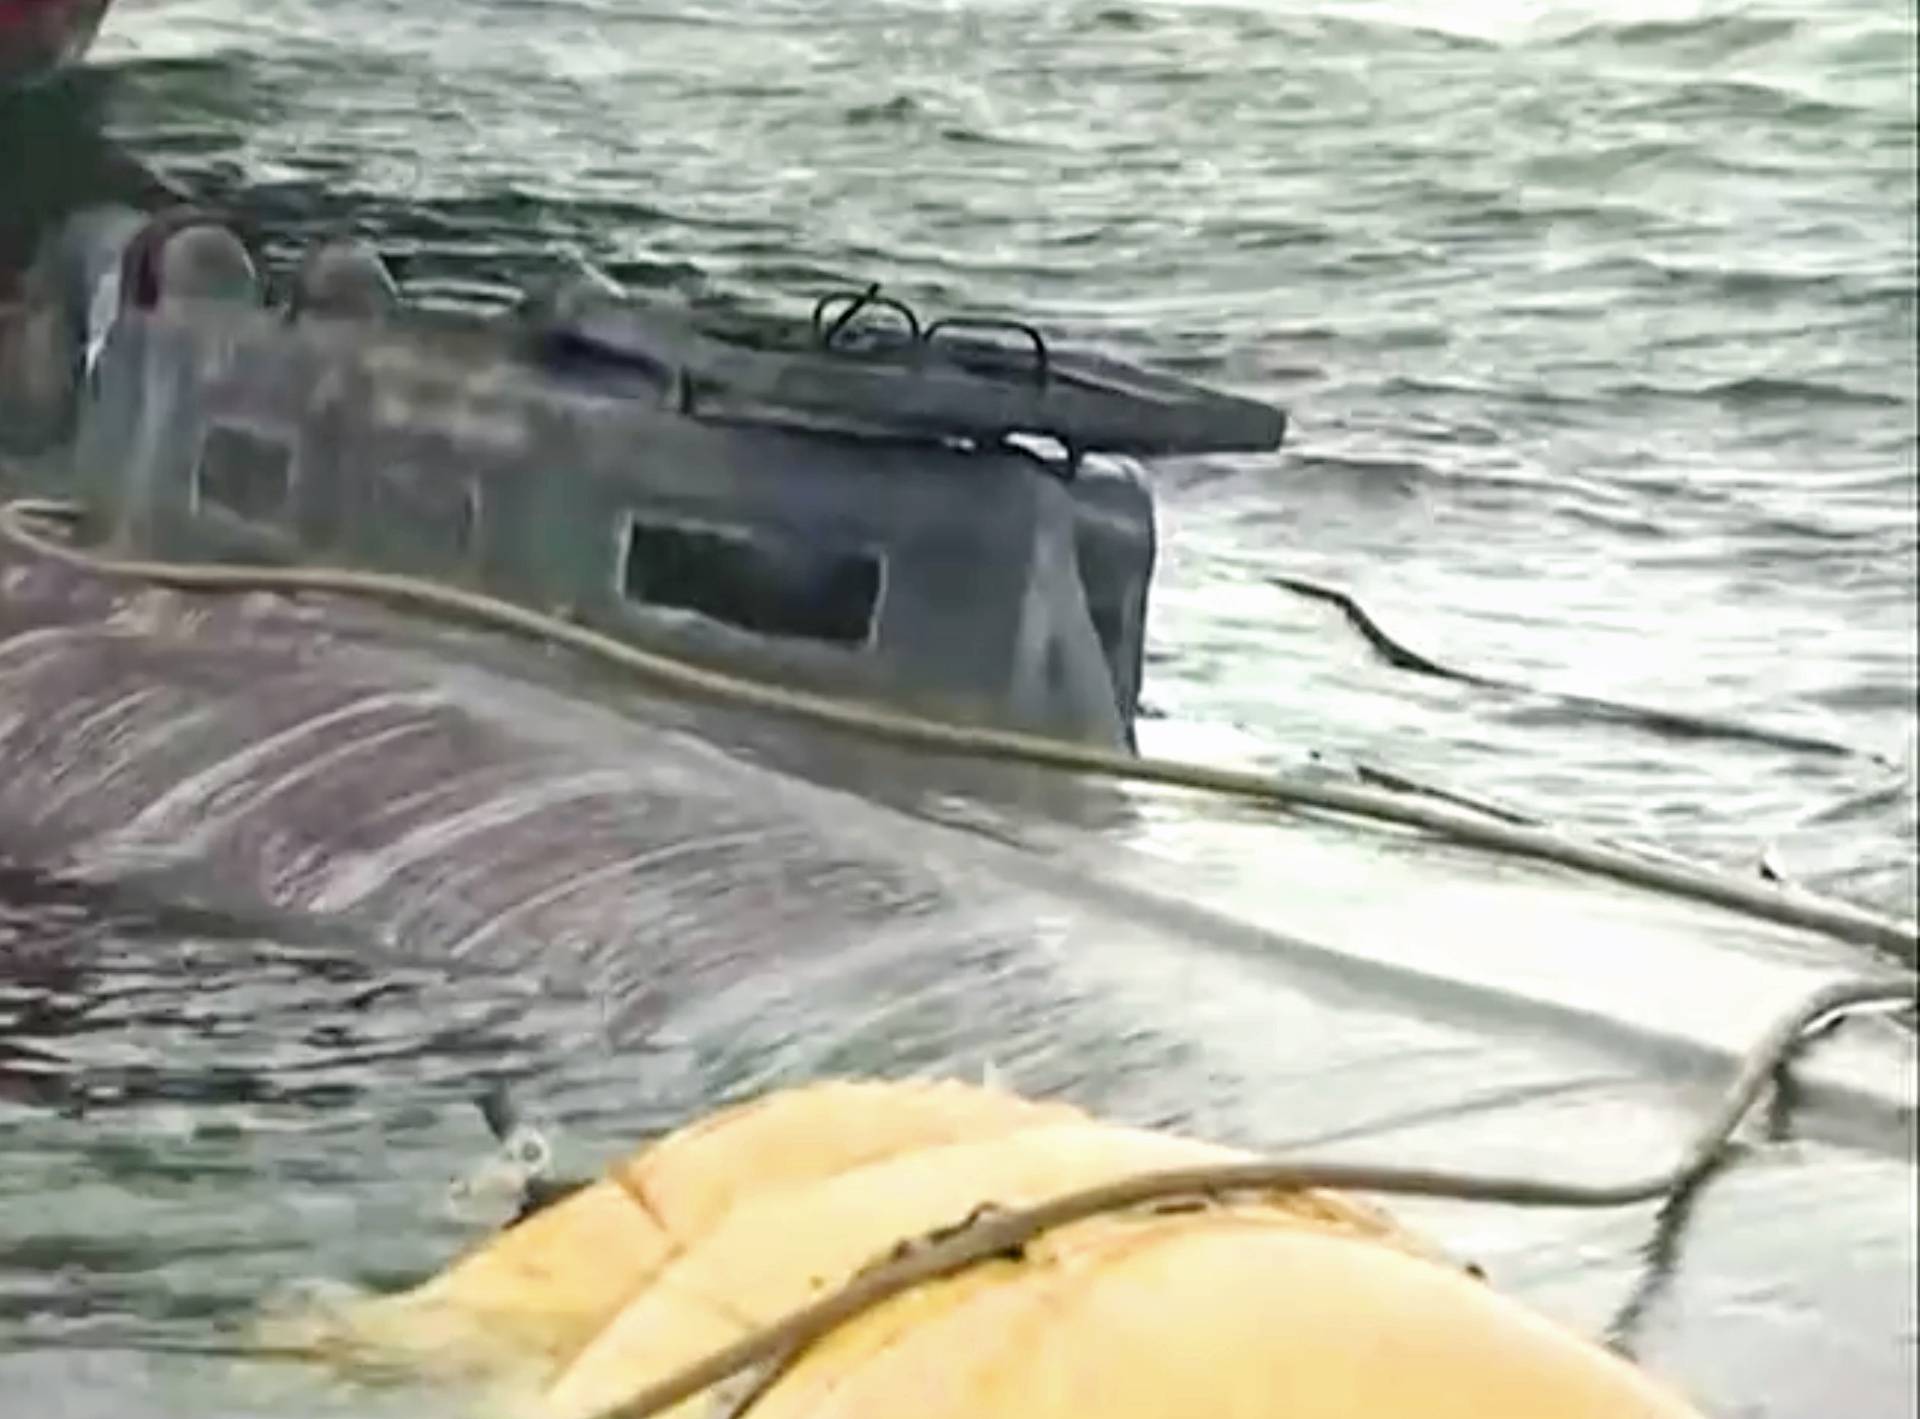 A suspected drug submarine believed to be carrying cocaine is refloated at a port in Aldan